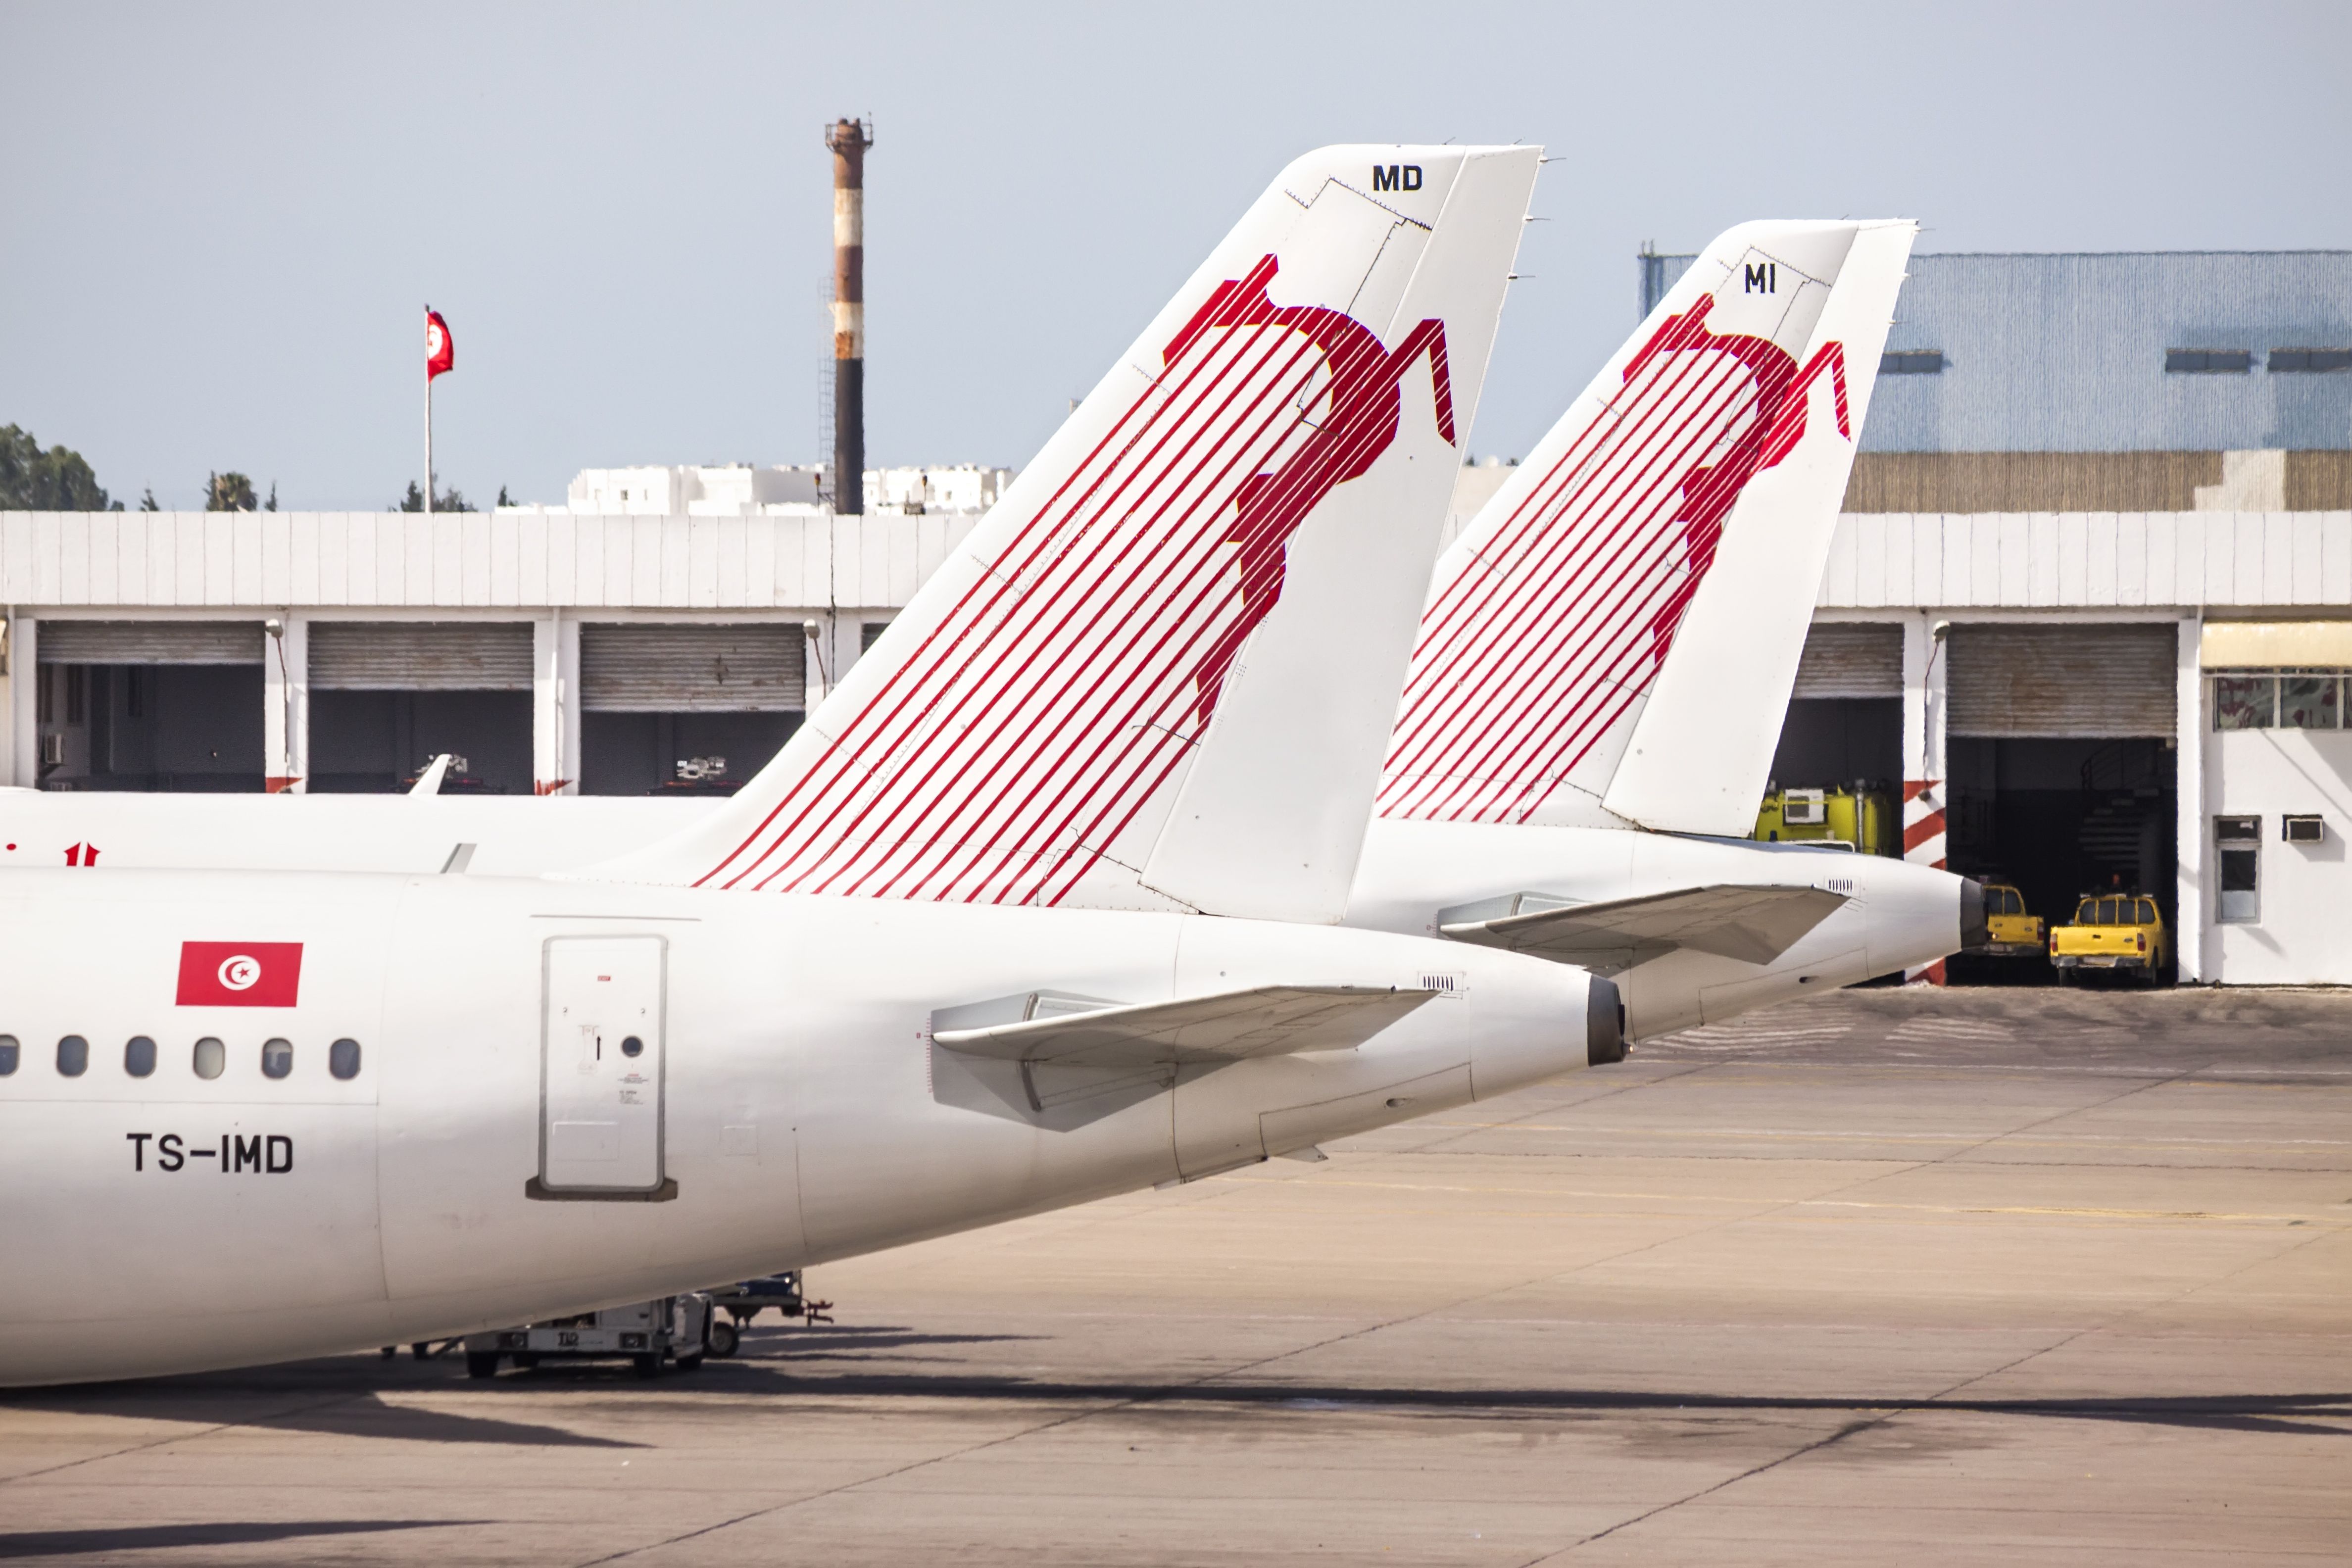 The tails of multipe Tunisair aircraft at an airport.